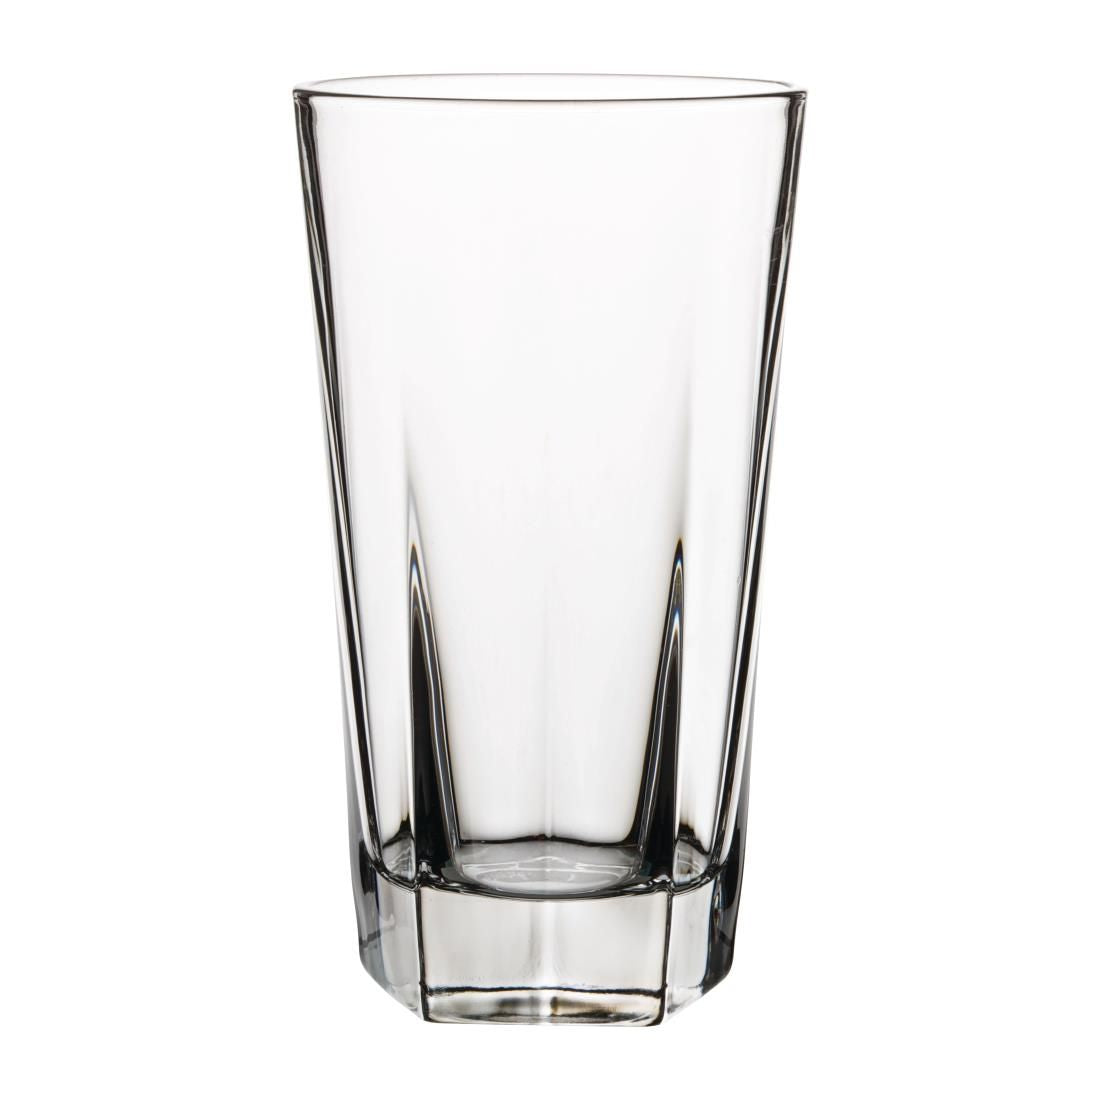 DH715 Utopia Caledonian Beer Glasses 360ml (Pack of 24) JD Catering Equipment Solutions Ltd